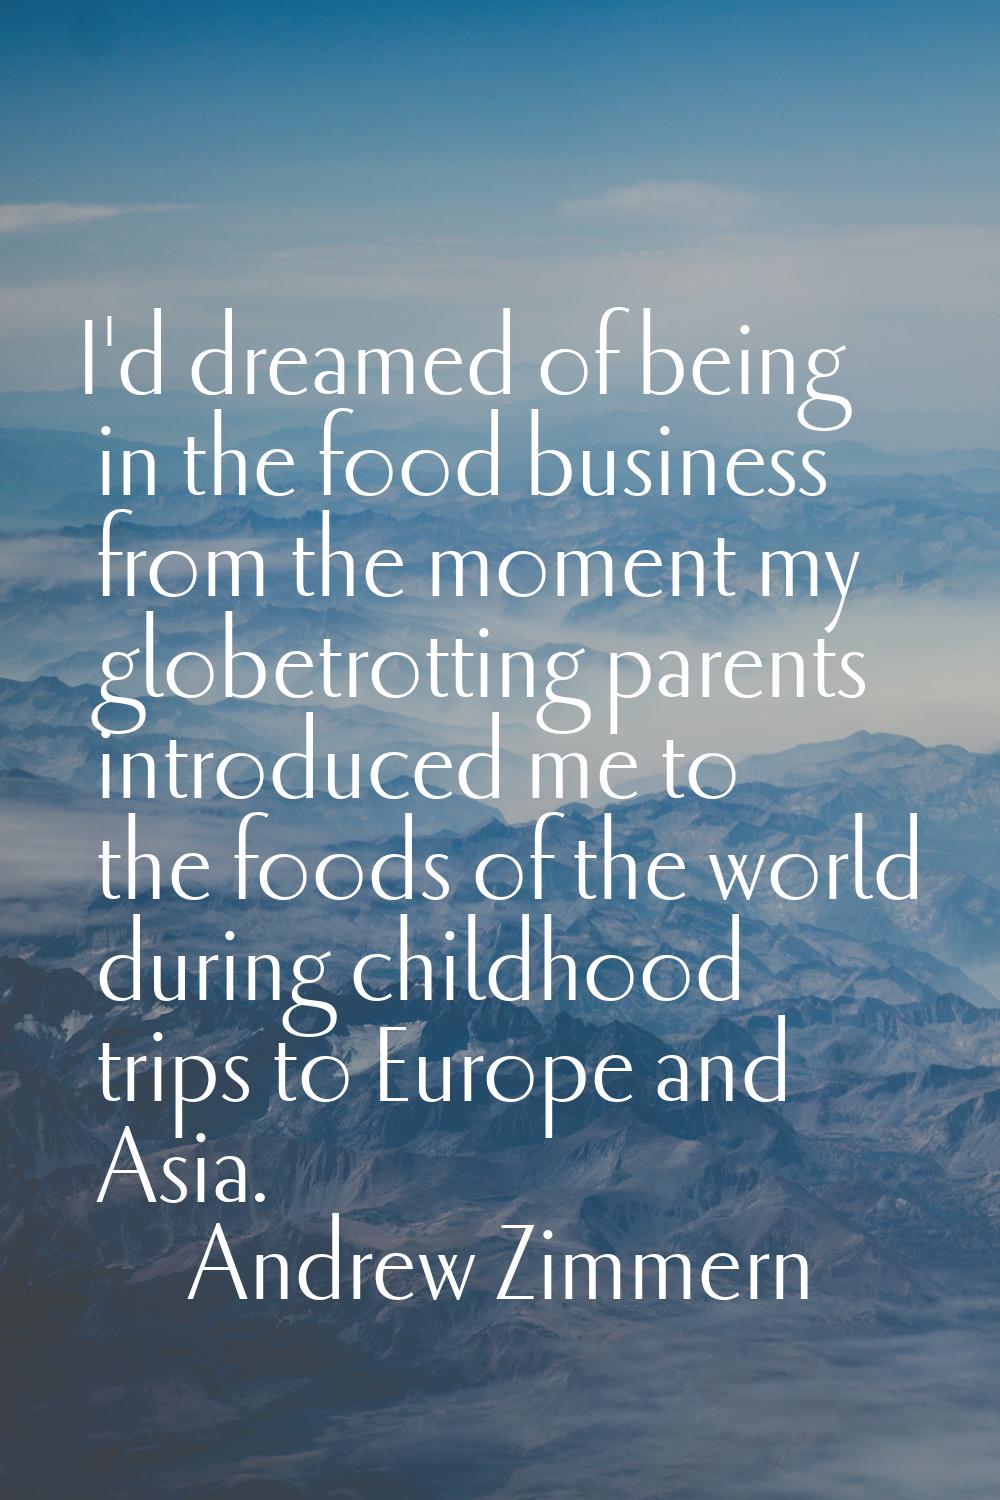 I'd dreamed of being in the food business from the moment my globetrotting parents introduced me to